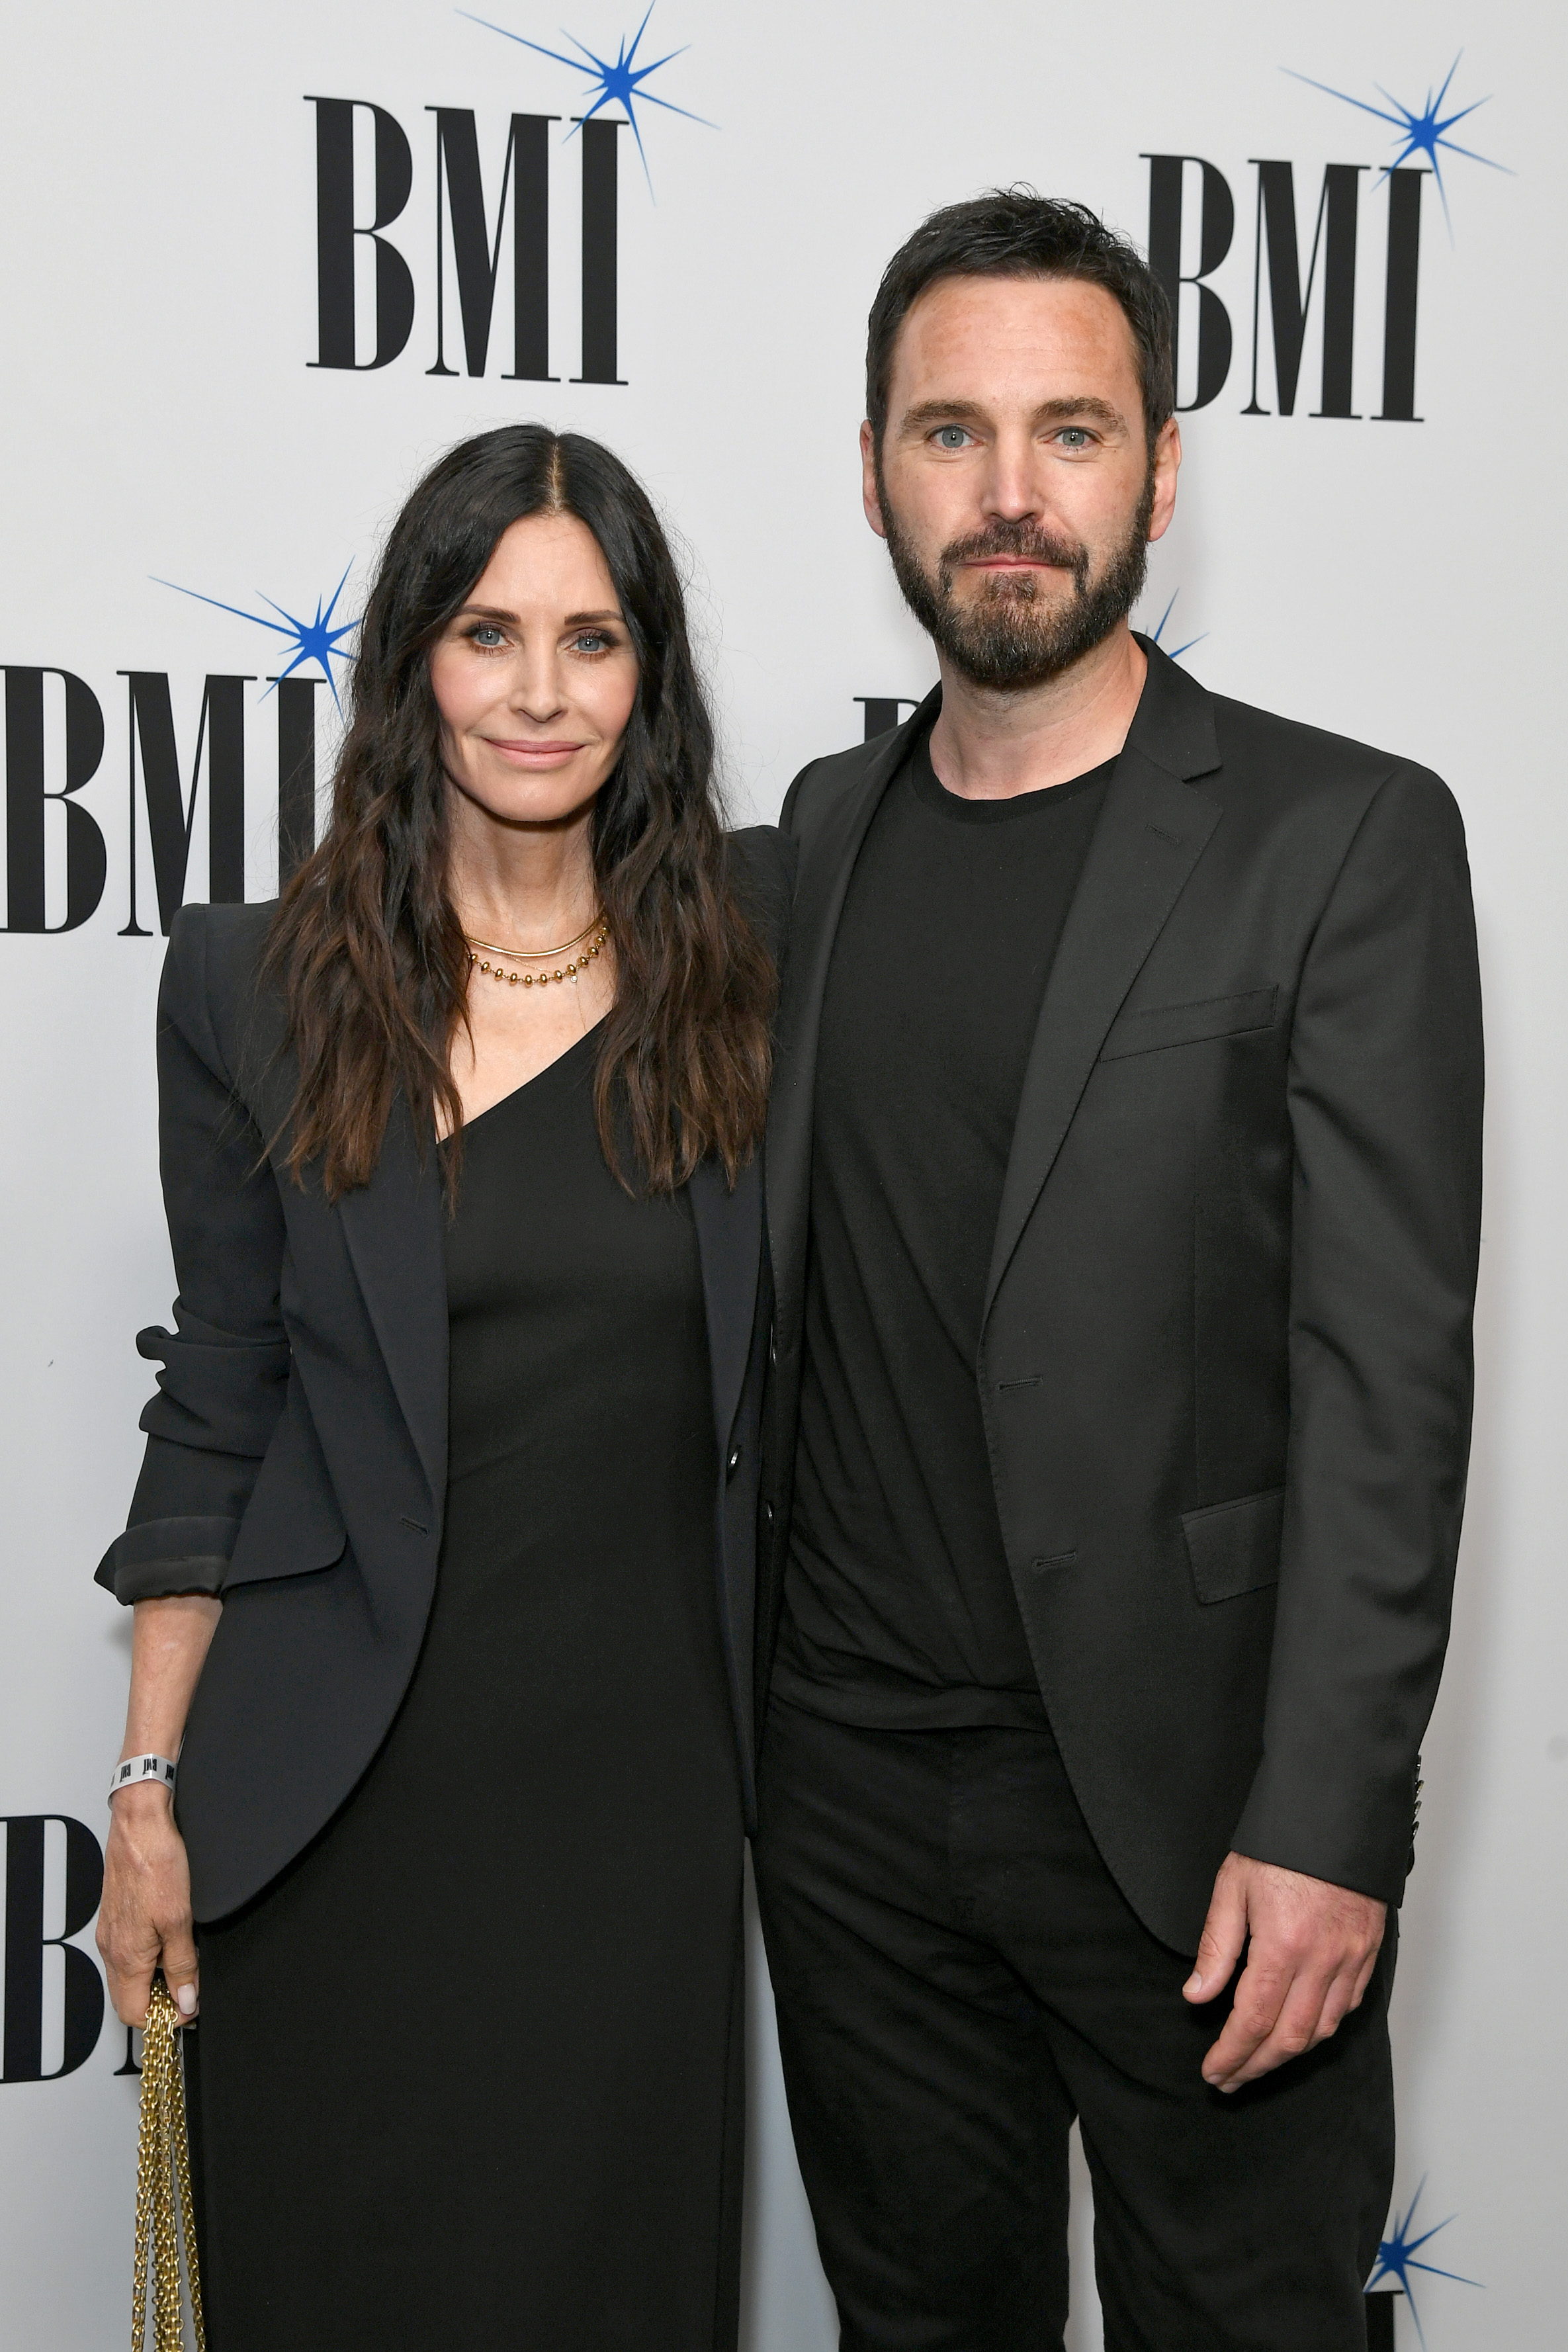 Courteney Cox and Johnny McDaid at the 70th Annual BMI Pop Awards in Beverly Hills, California on May 10, 2022 | Source: Getty Images